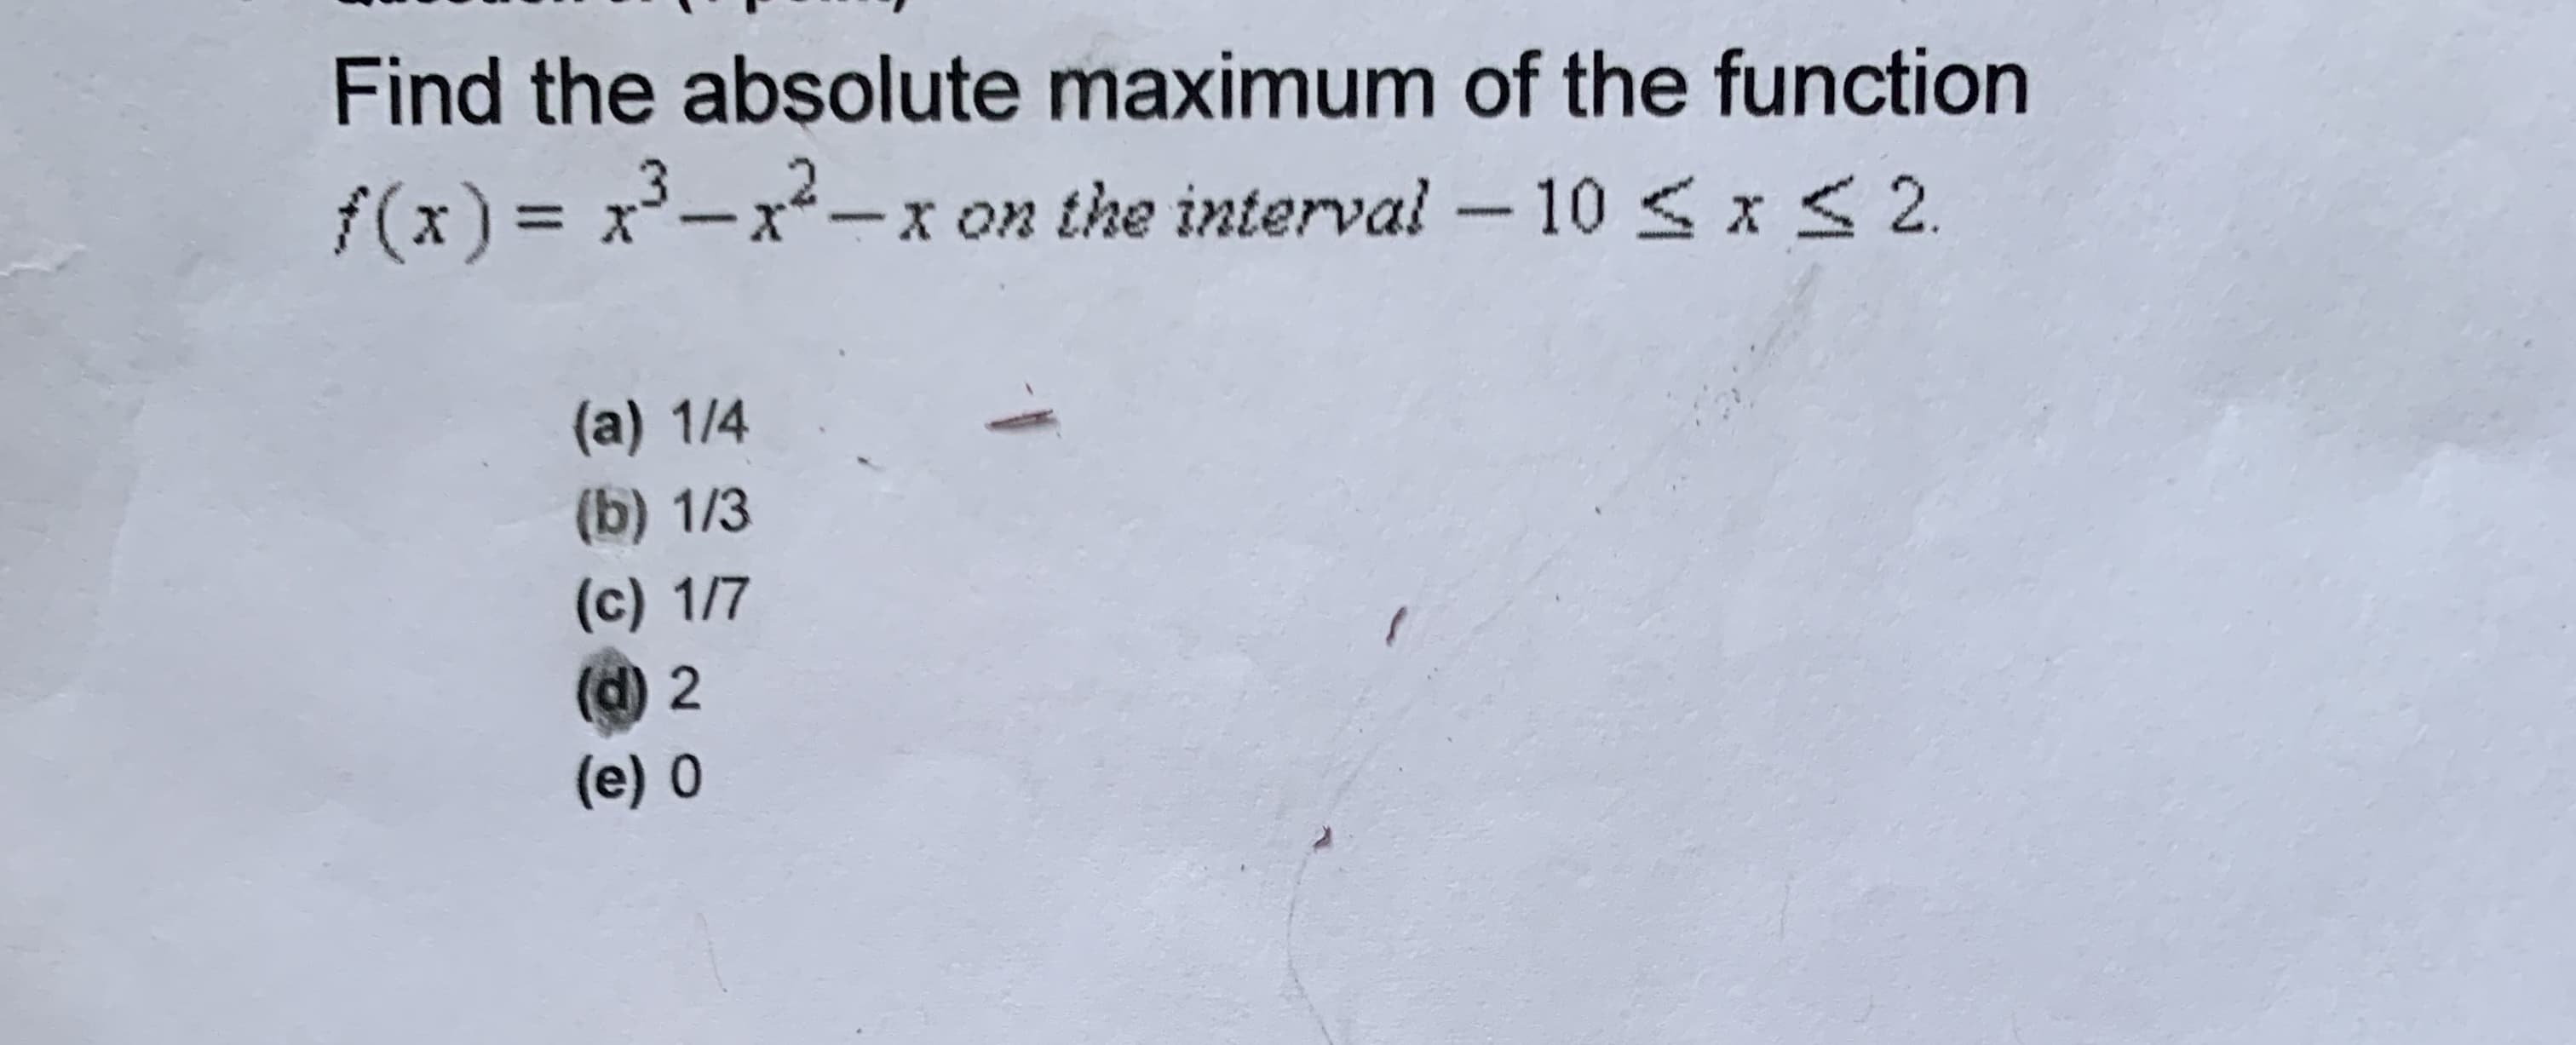 Find the absolute maximum of the function
f(x) = x-x-x On the interval - 10 sxS2
(a) 14
(b) 13
(e) 1/7
(e) 0
